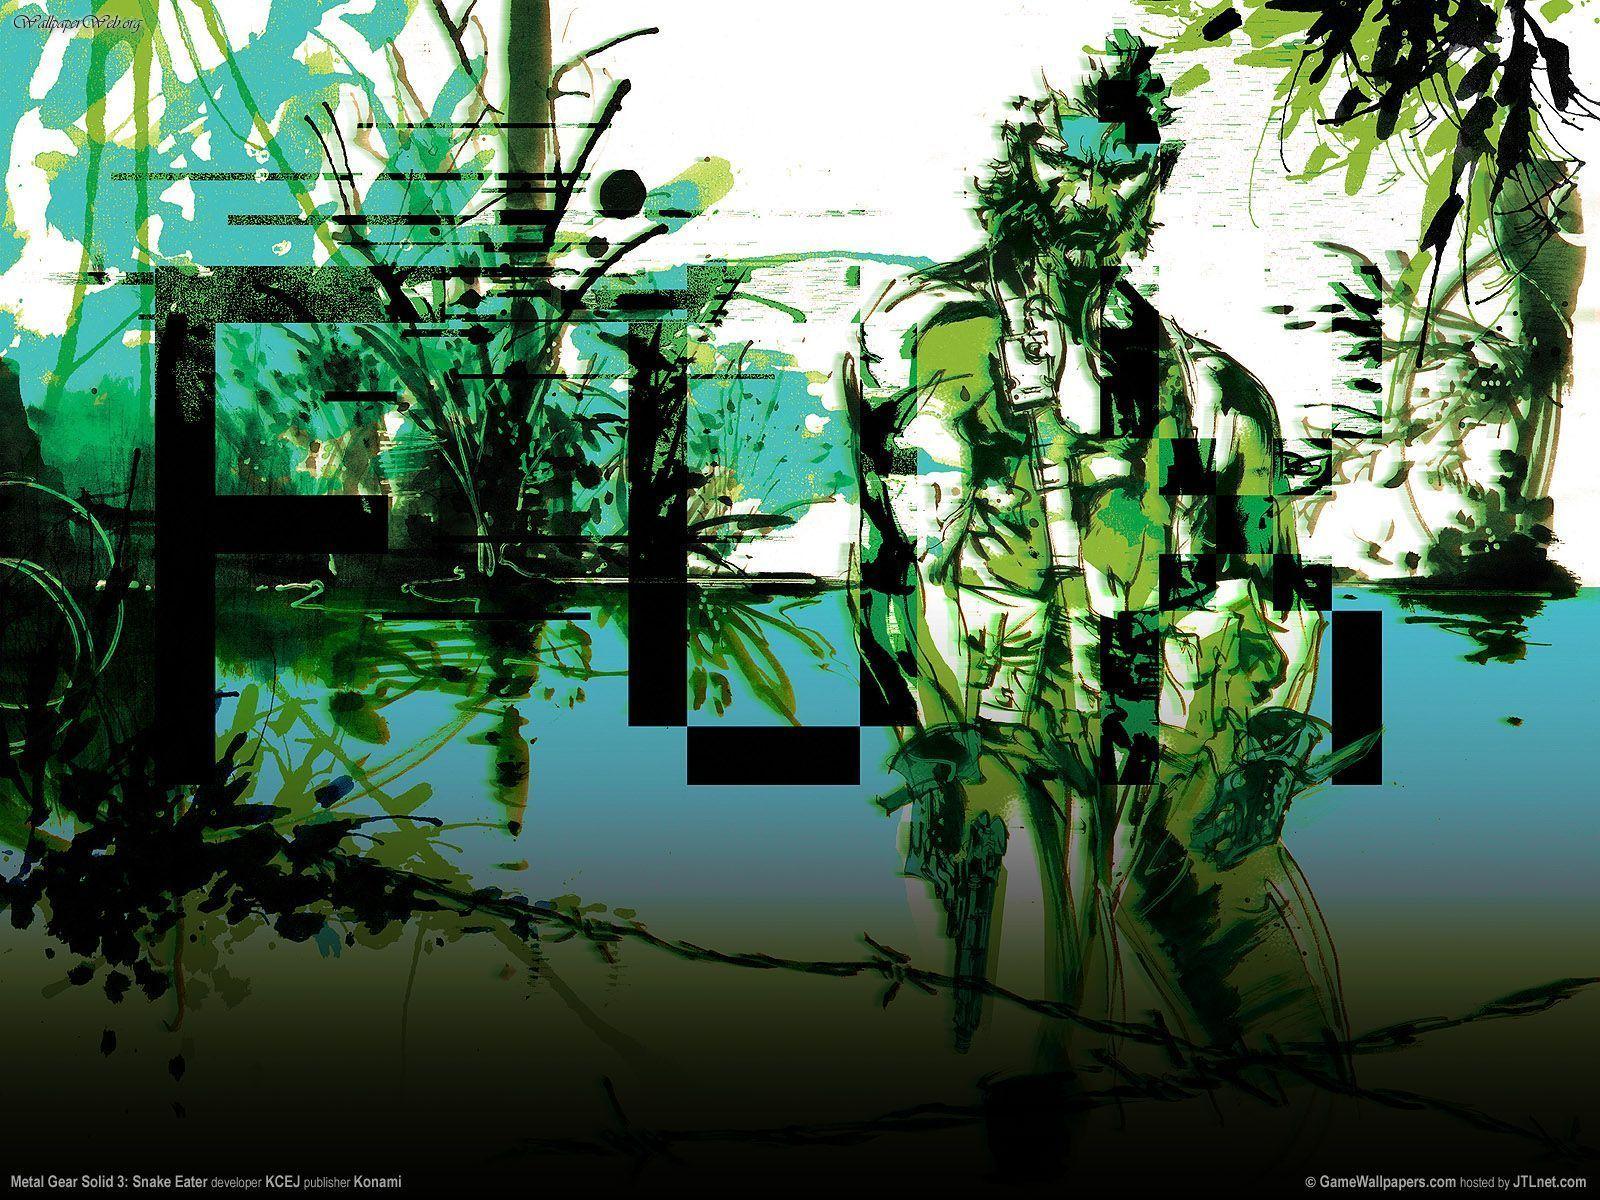 Games: Metal Gear Solid 3 Snake Eater, picture nr. 29957